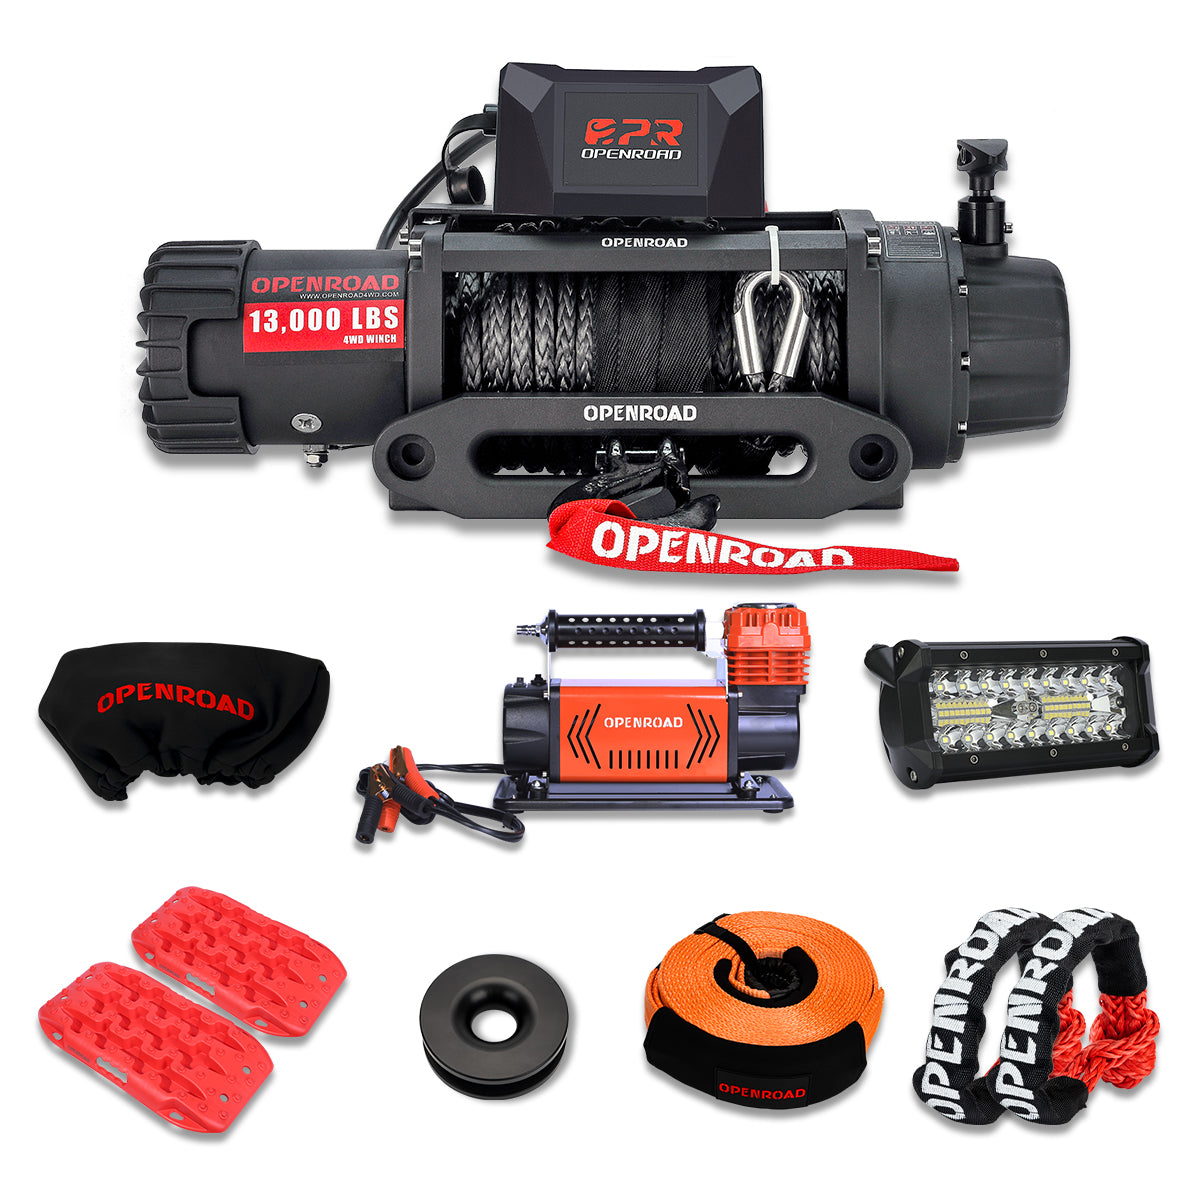 13000lbs Electric Winch with cover+soft shackle(2pcs)+Heavy Duty Tow Strap3''x30' (35,000 lbs)+Traction Boards+ 2.54 CFM AIR COMPRESSOR +Light Bar 7-inch+grasping ring  openroad4wd.com   